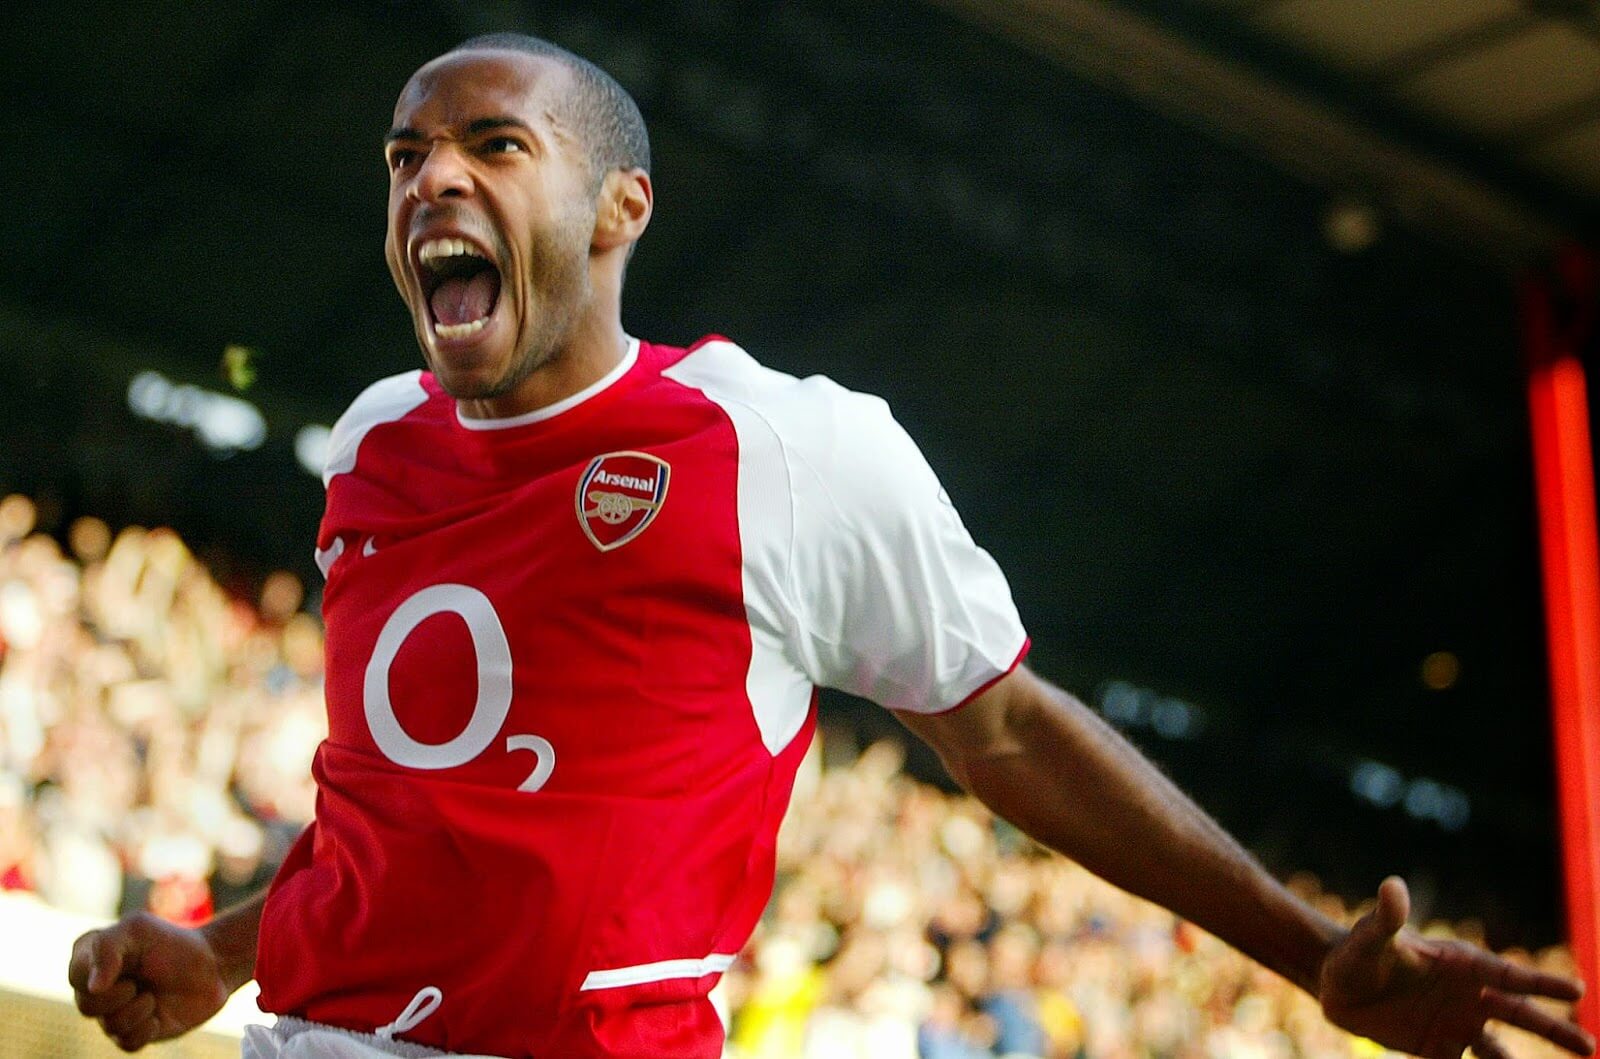 Thierry Henry Bio, Age, Stats and Bio